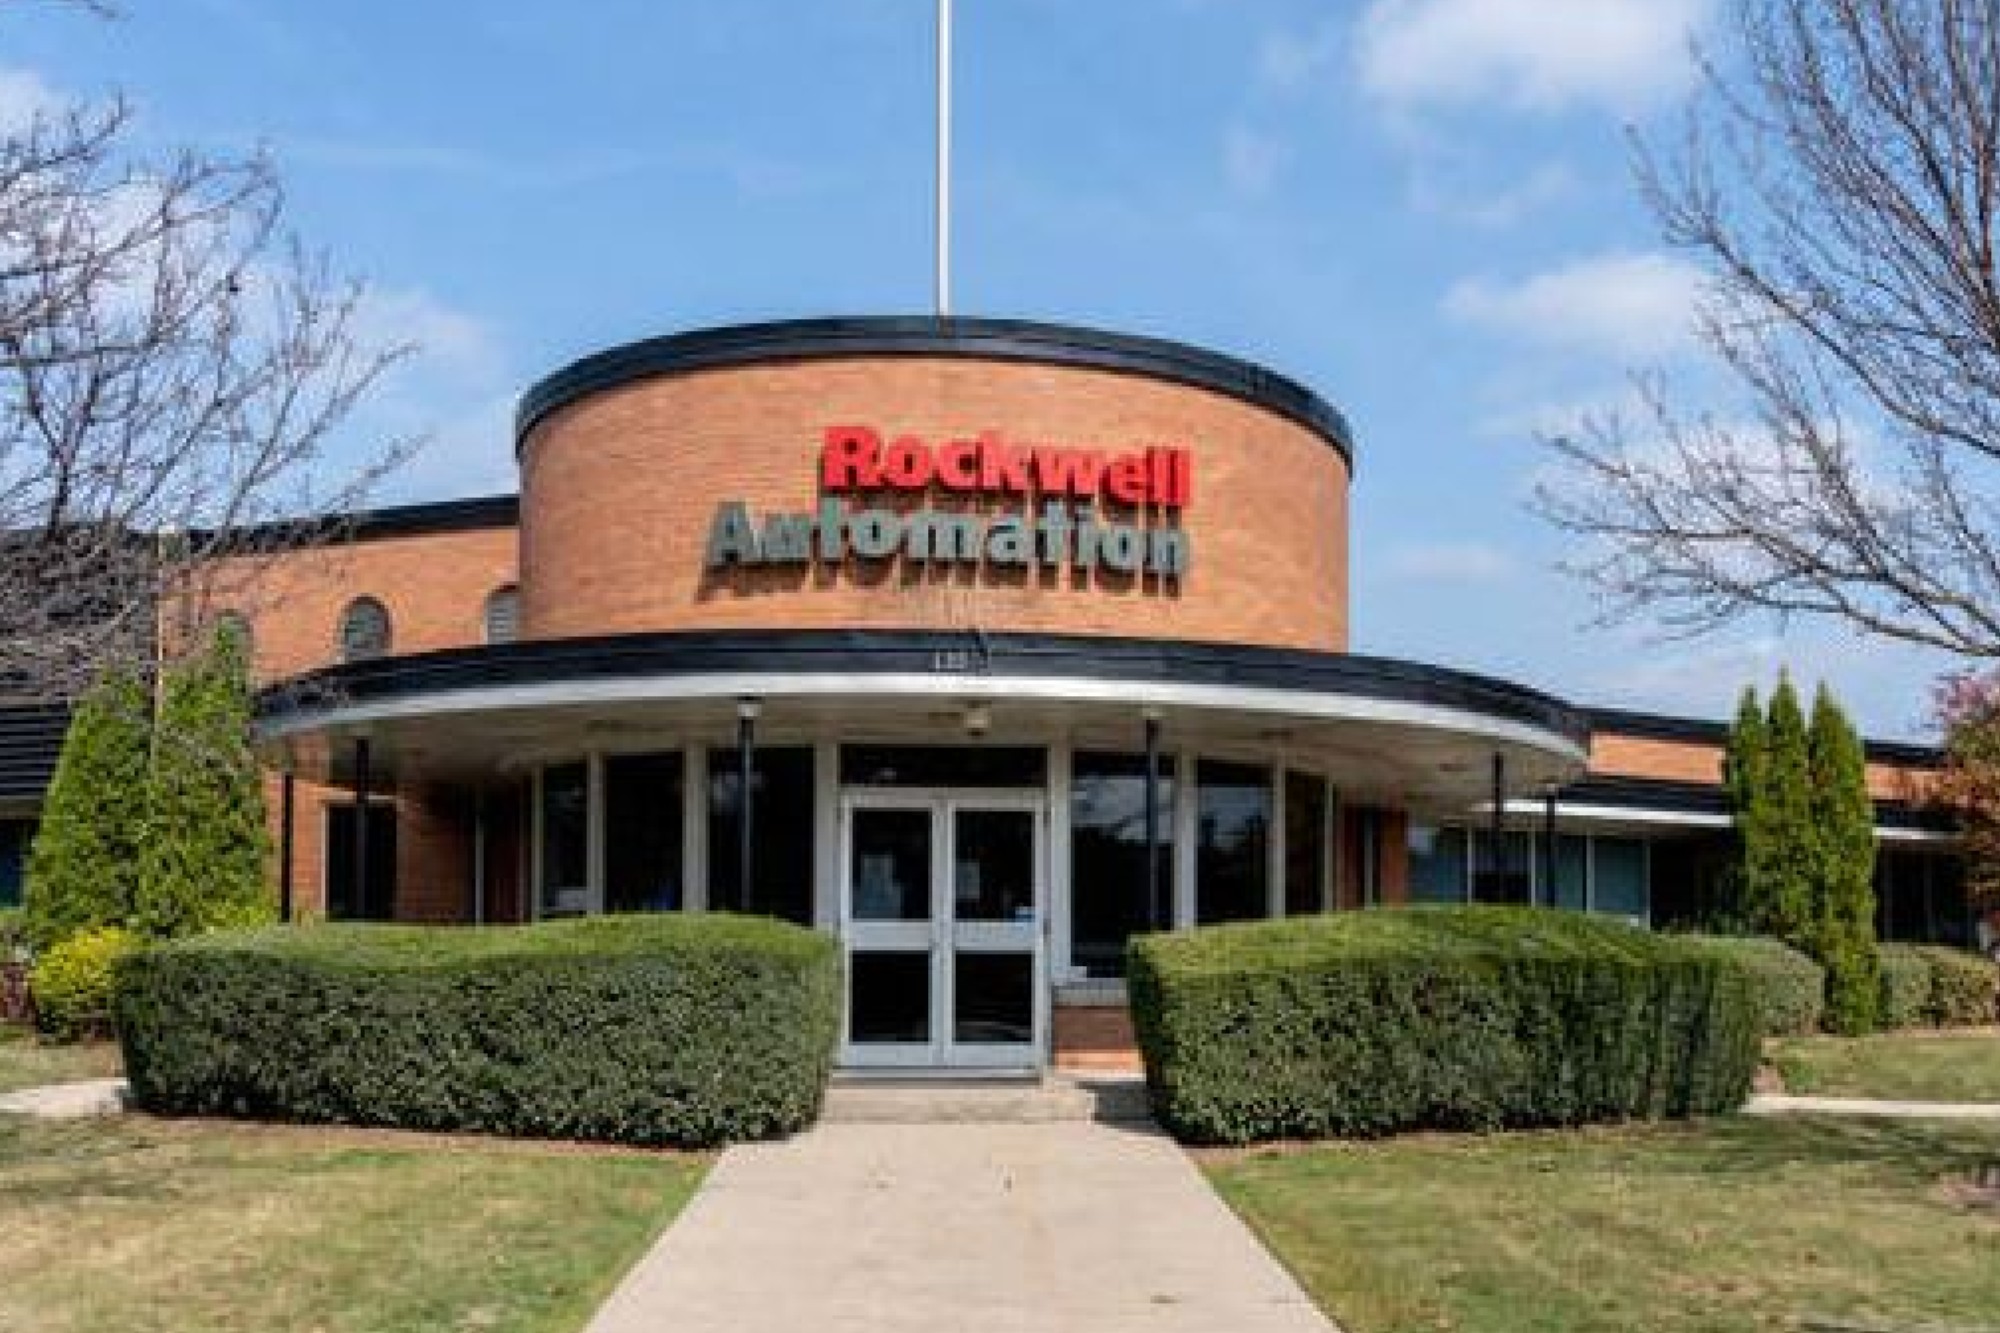 Rockwell Automation will set up a new manufacturing plant to boost productivity